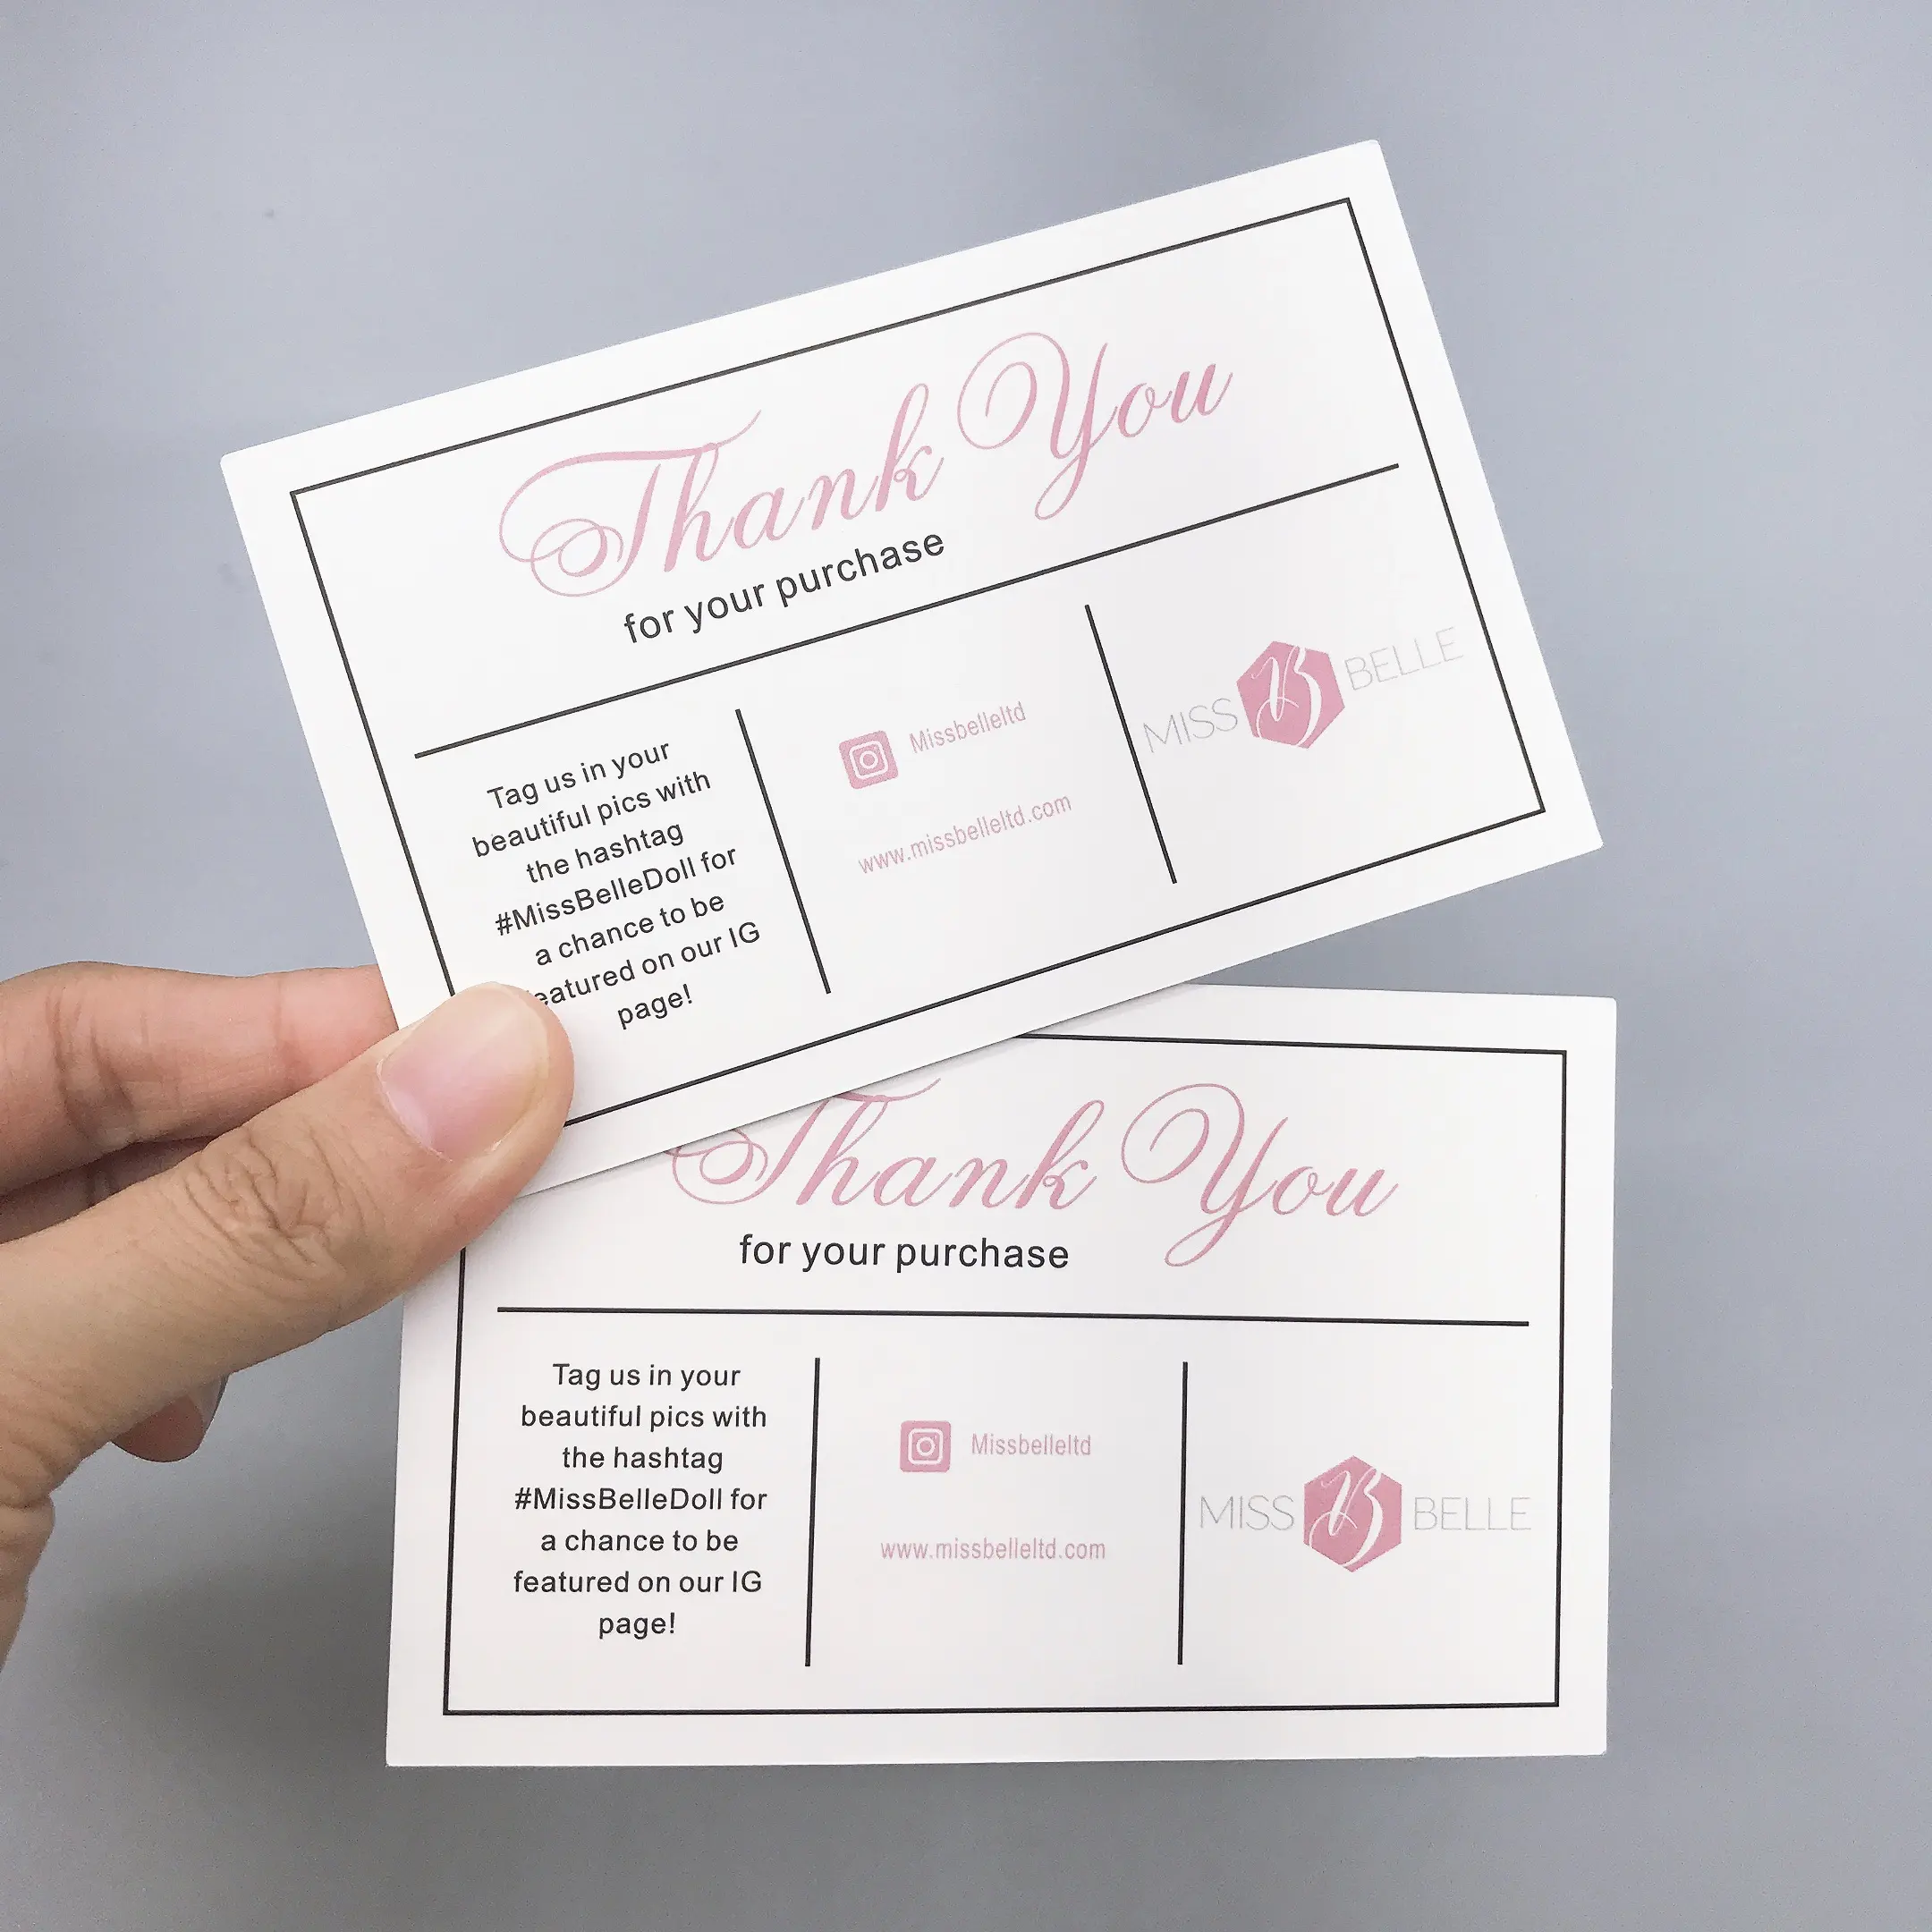 thank you cards custom with logo printing amazon bulk 100 pack set greeting/gift/thank you card for business